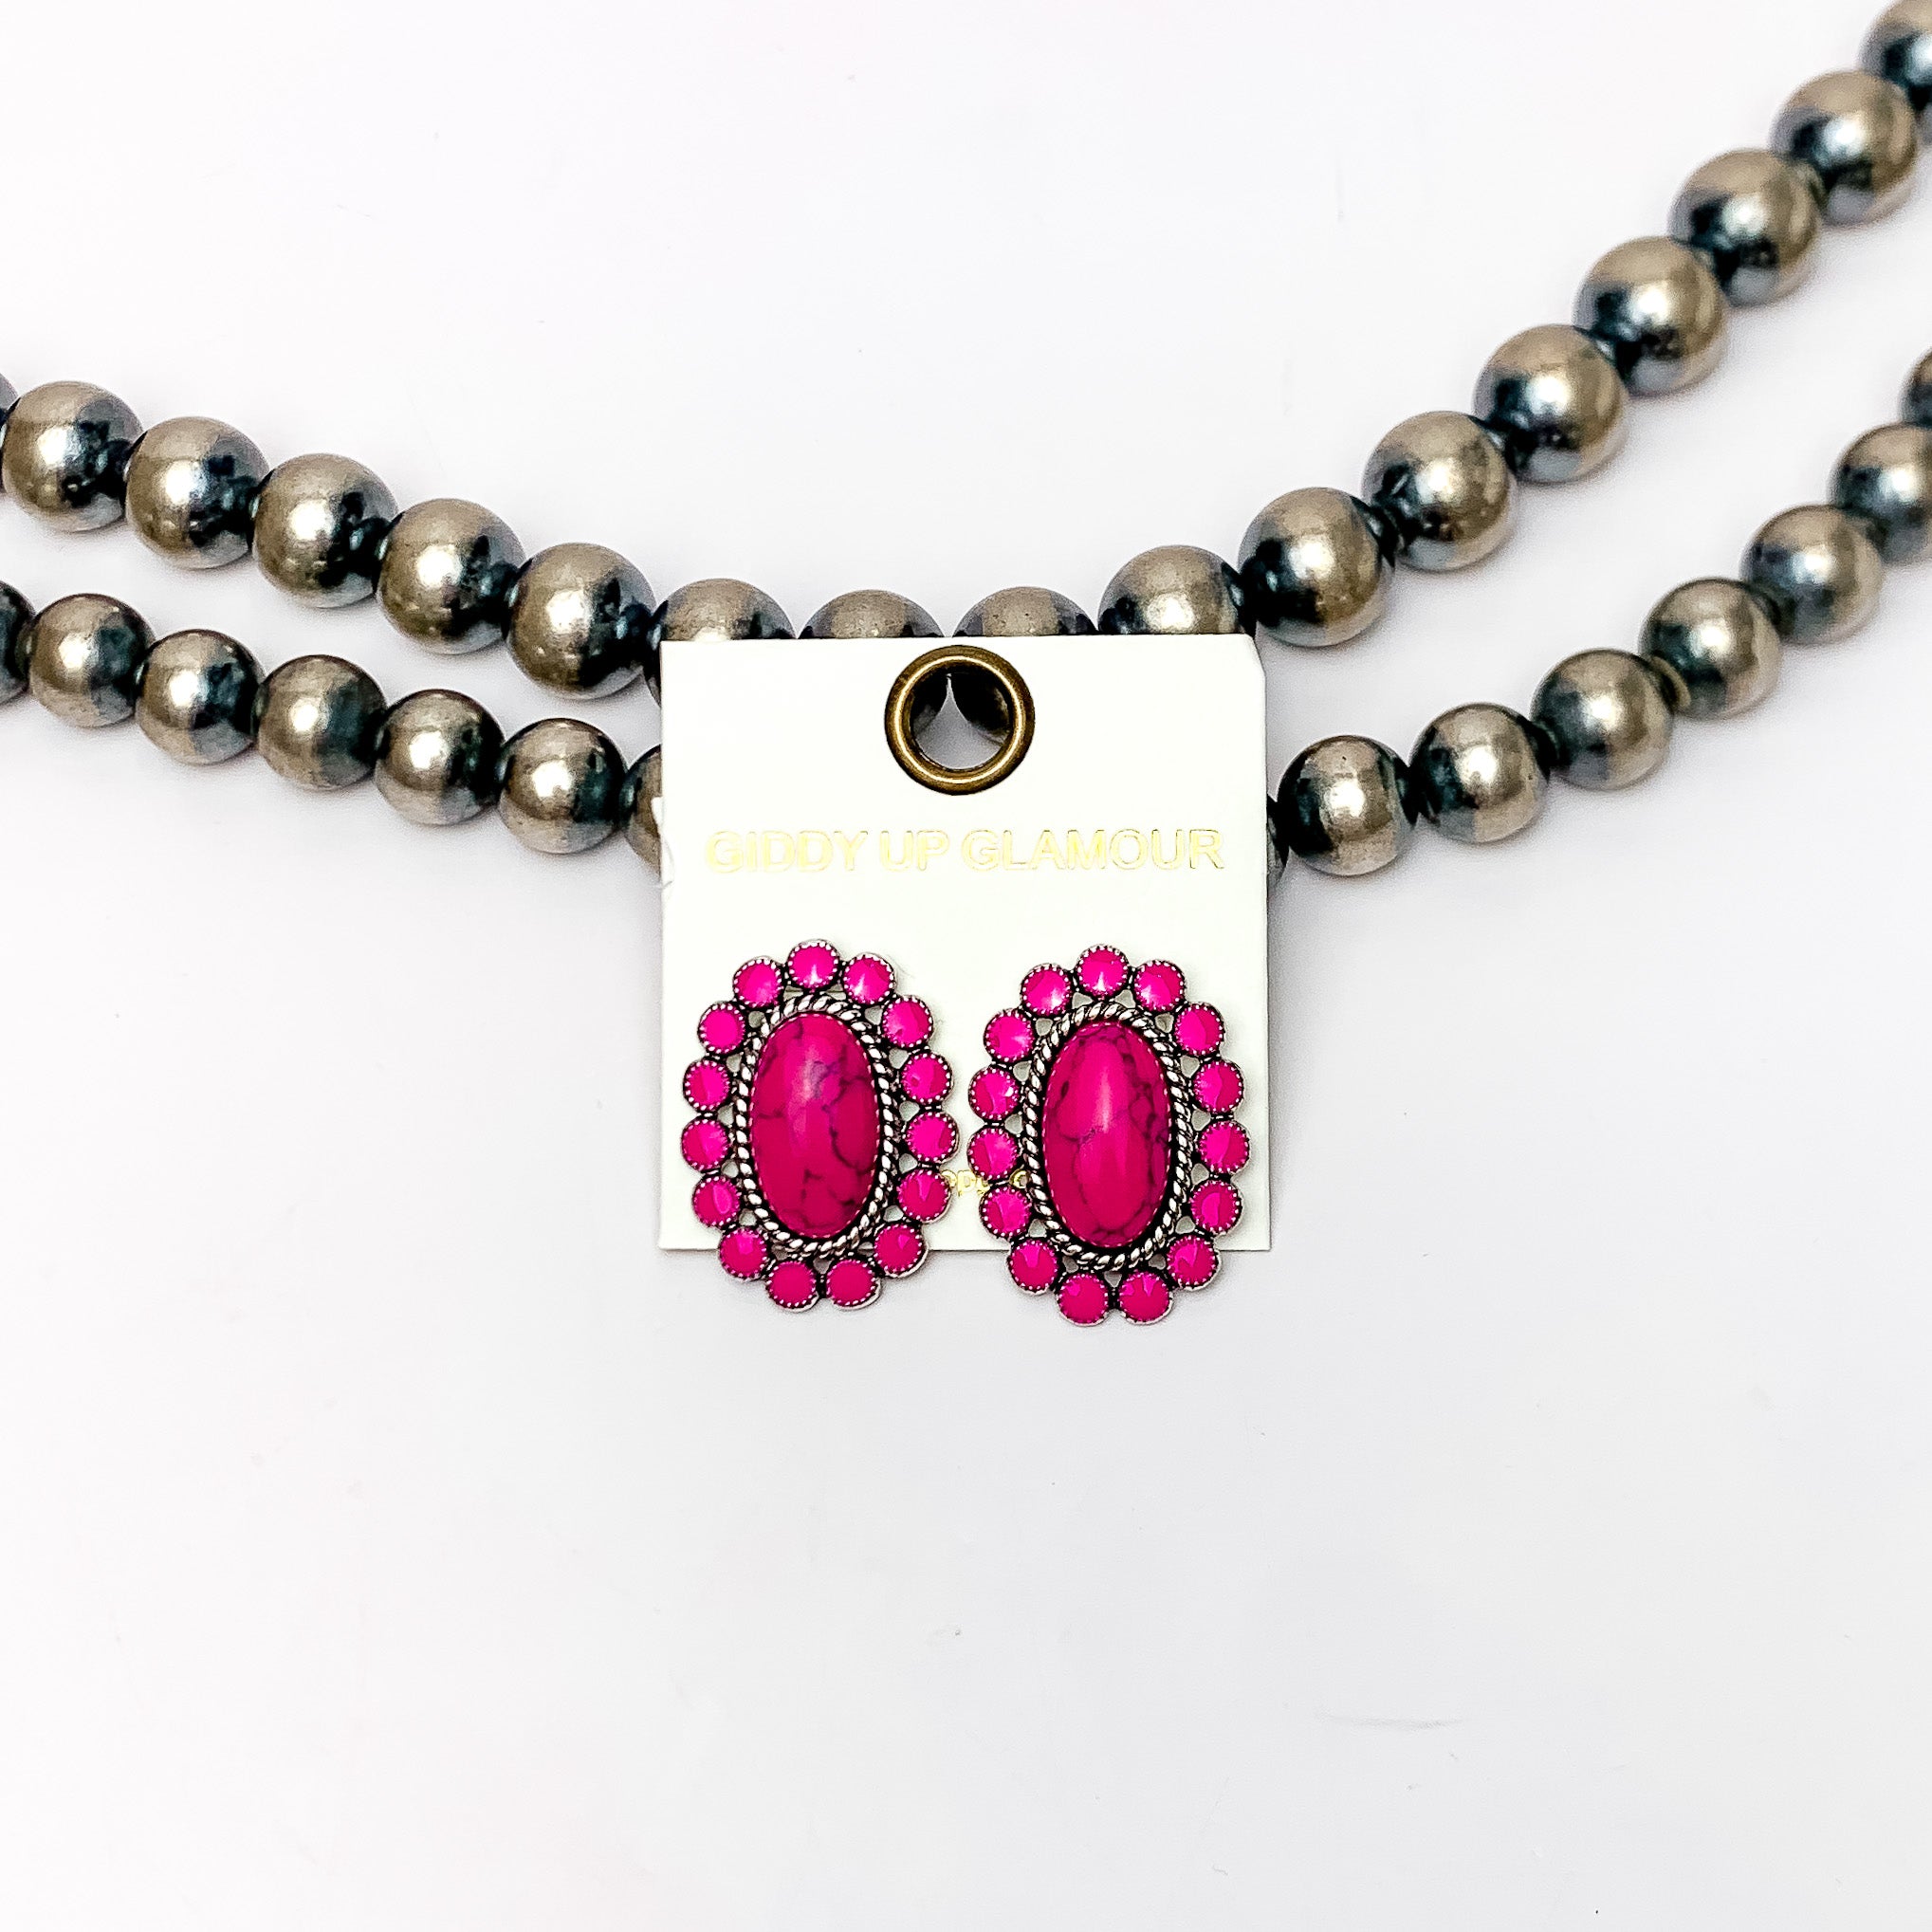 Concho post earrings in hot pink. These earrings are pink stones surrounding a bigger stone. Pictured on a white background with Navajo pearls behind the earrings.